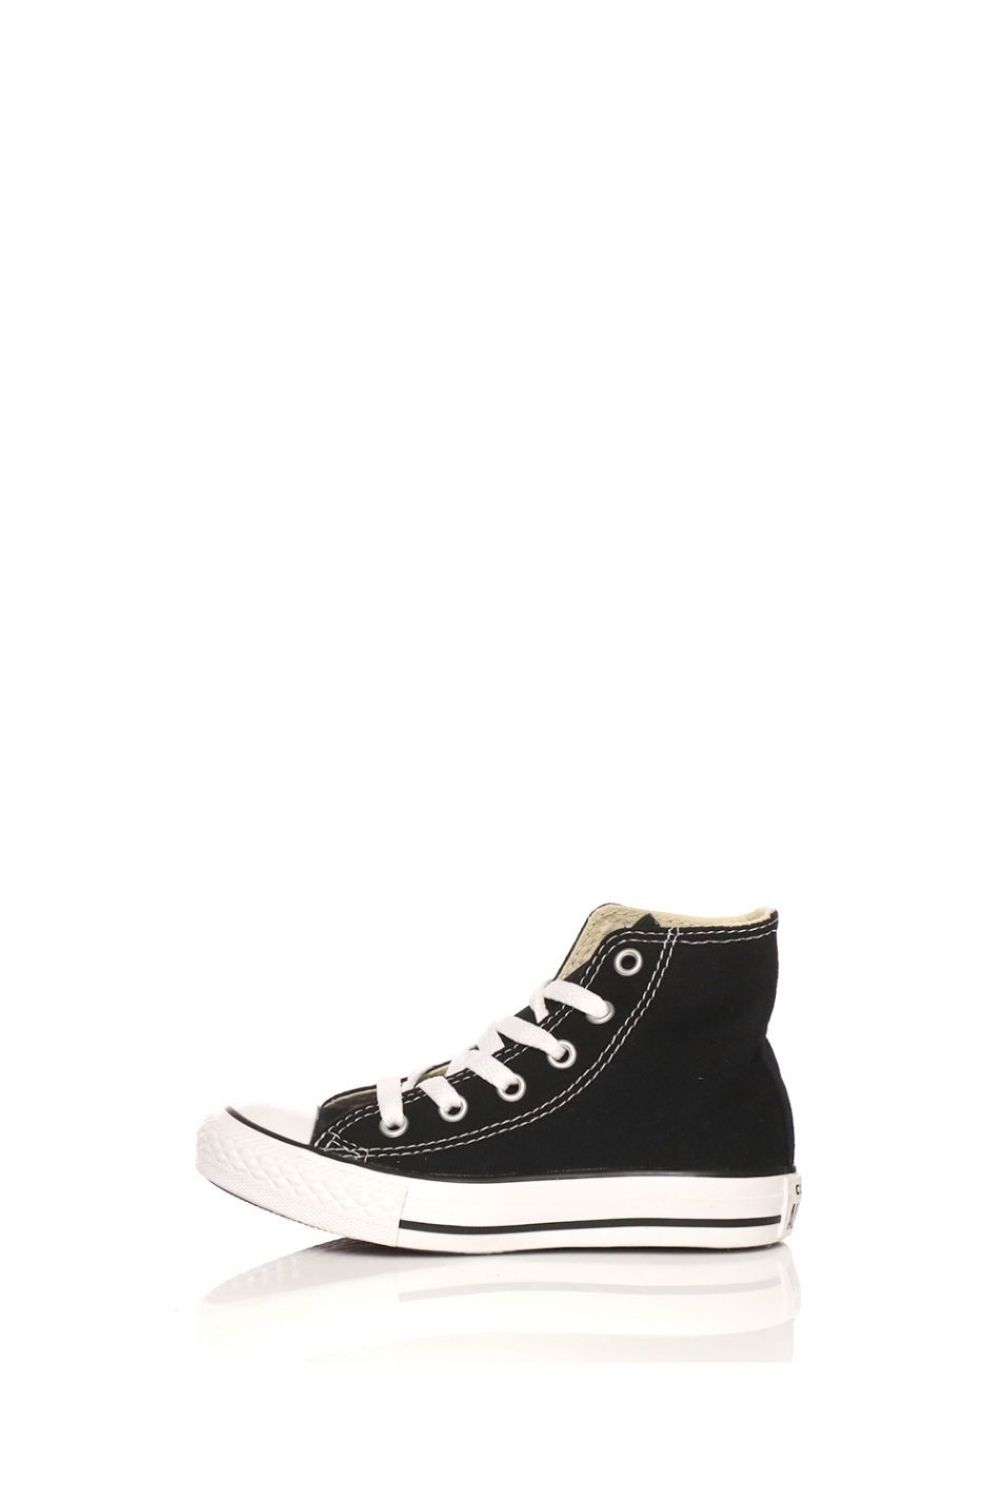 CONVERSE - Παιδικά μποτάκια Chuck Taylor All Star μαύρα Παιδικά/Girls/Παπούτσια/Sneakers